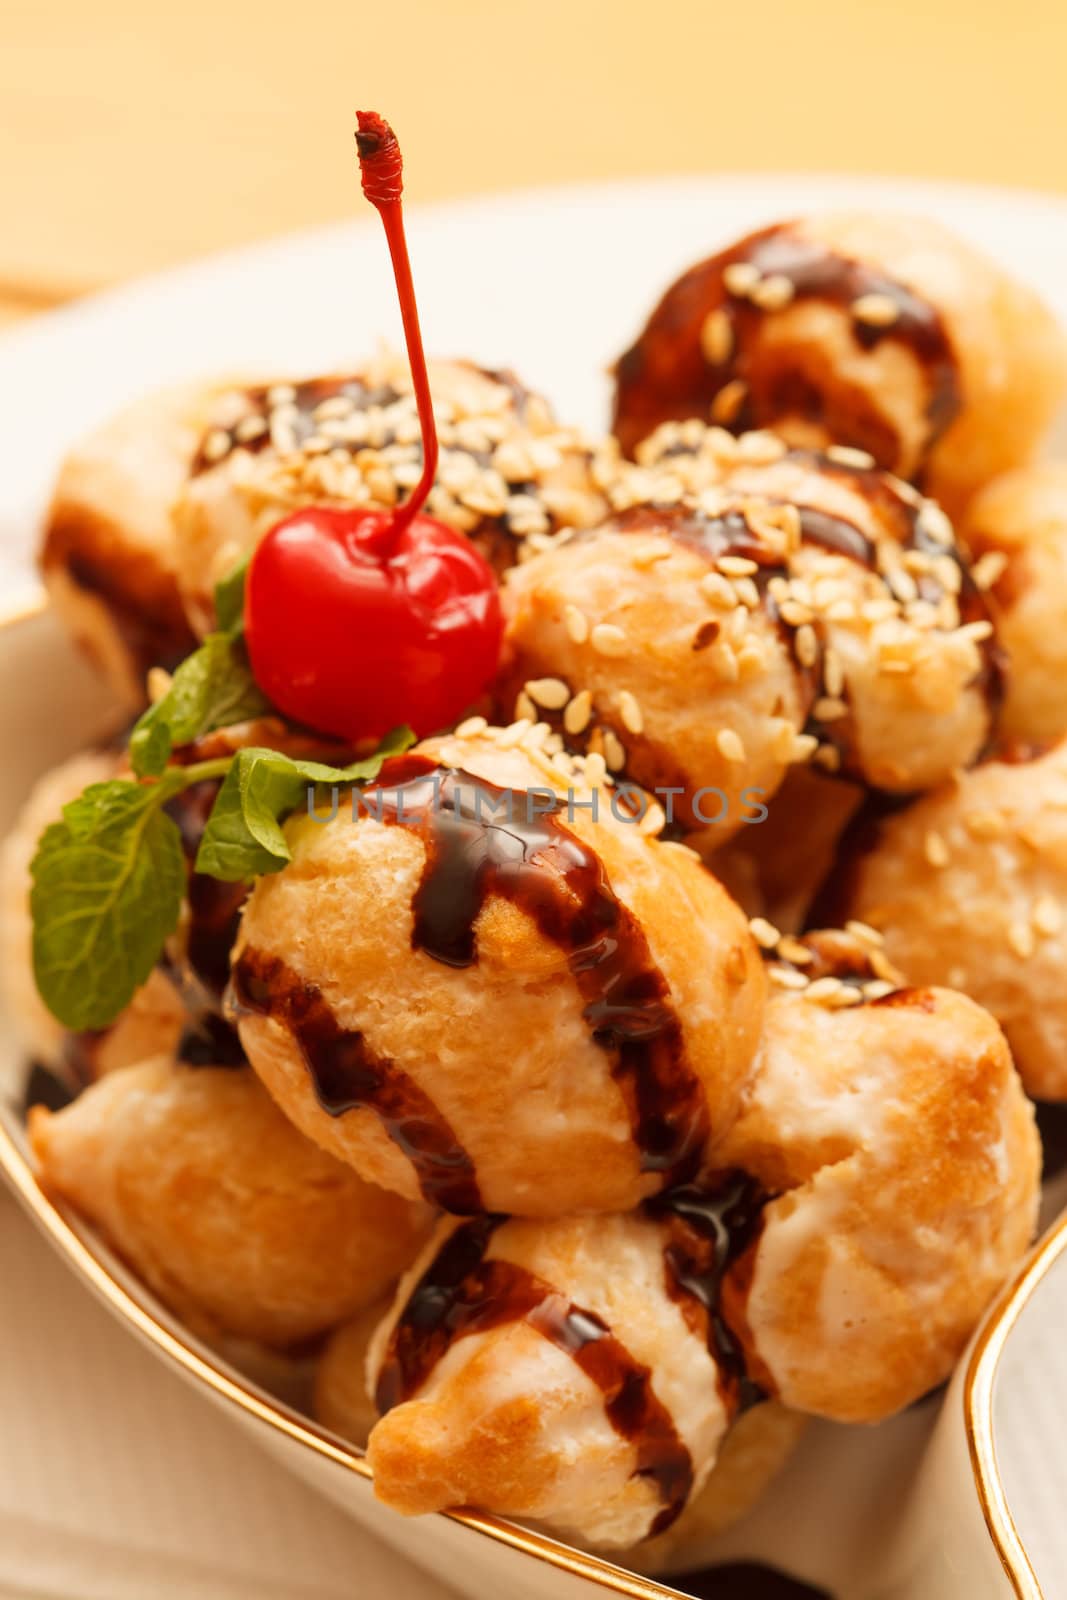 profiteroles with chocolate by shebeko